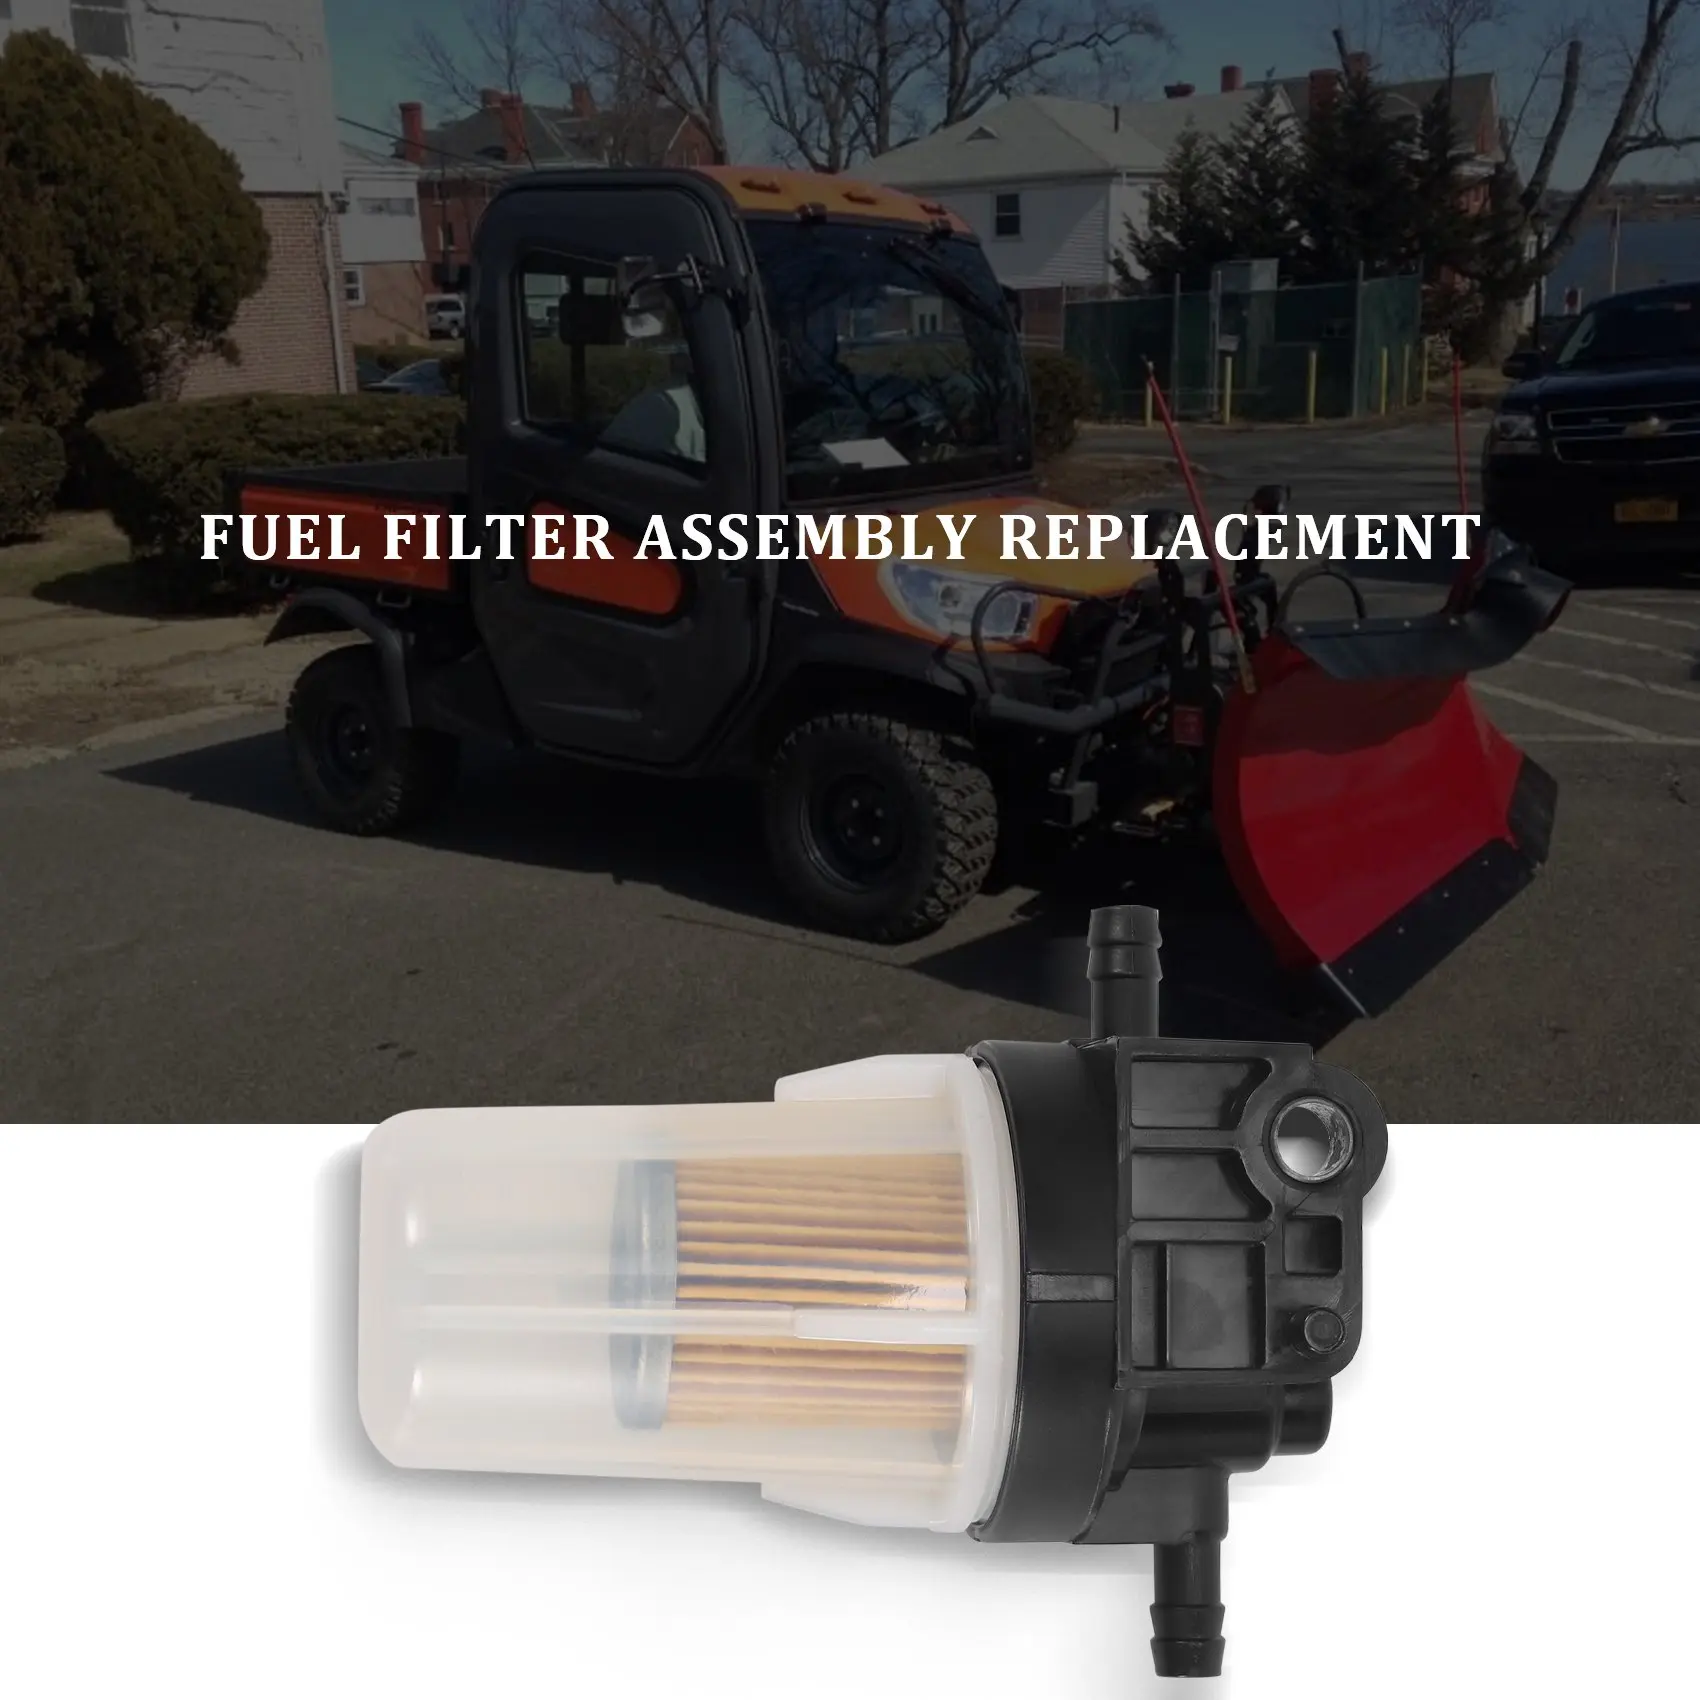 

6A320-58862 Fuel Filter Assembly Replacement Parts for Kubota B & L Series RTV-X1100 RTV-X900G RTV-X900W RTV-X1120DR